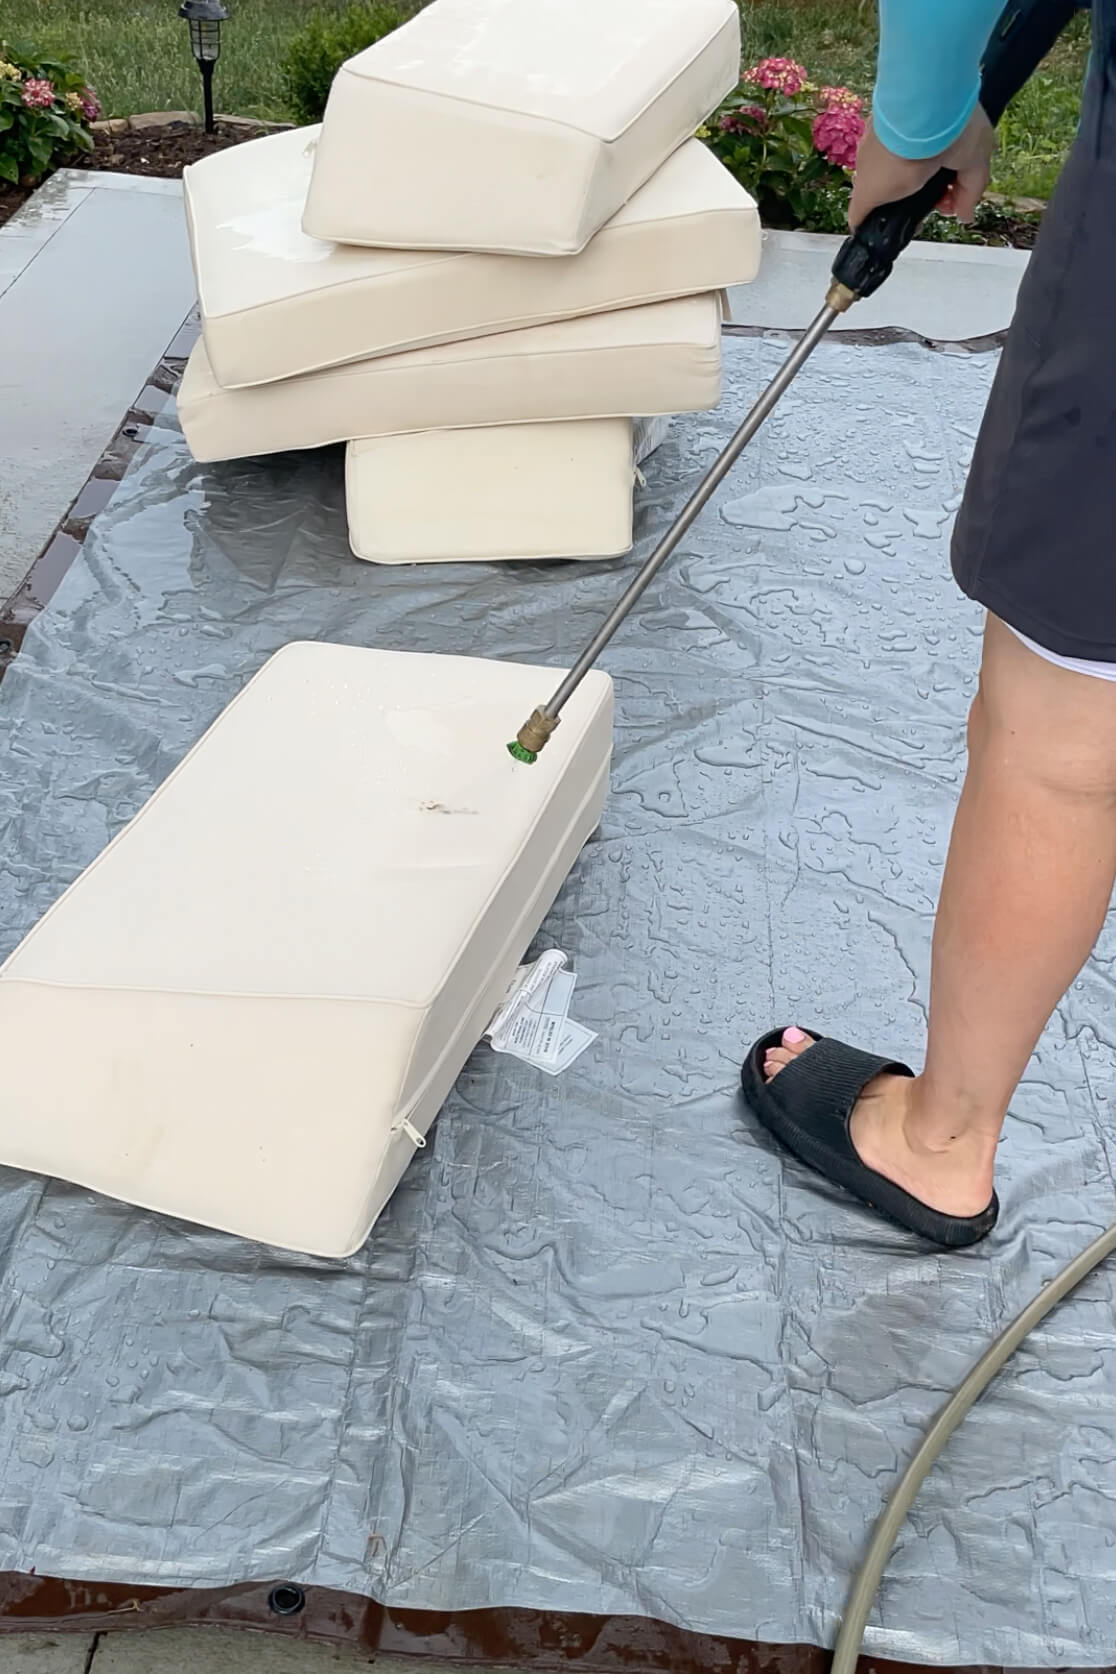 Using a pressure washer to clean patio furniture.